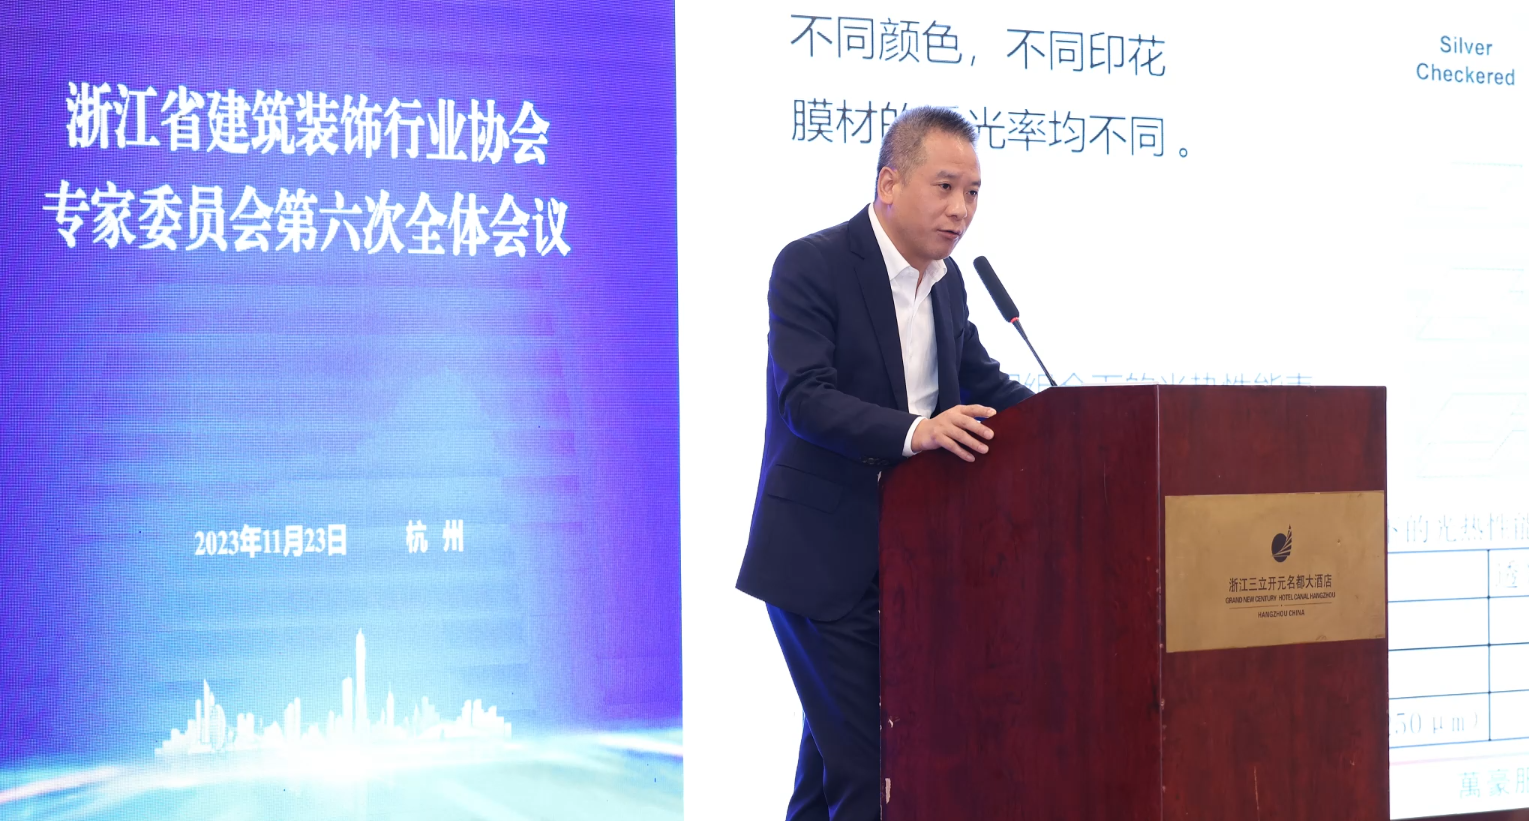 Wanhao Space Structure participated in the sixth plenary meeting of the Expert Committee of Zhejiang Building Decoration Industry Association